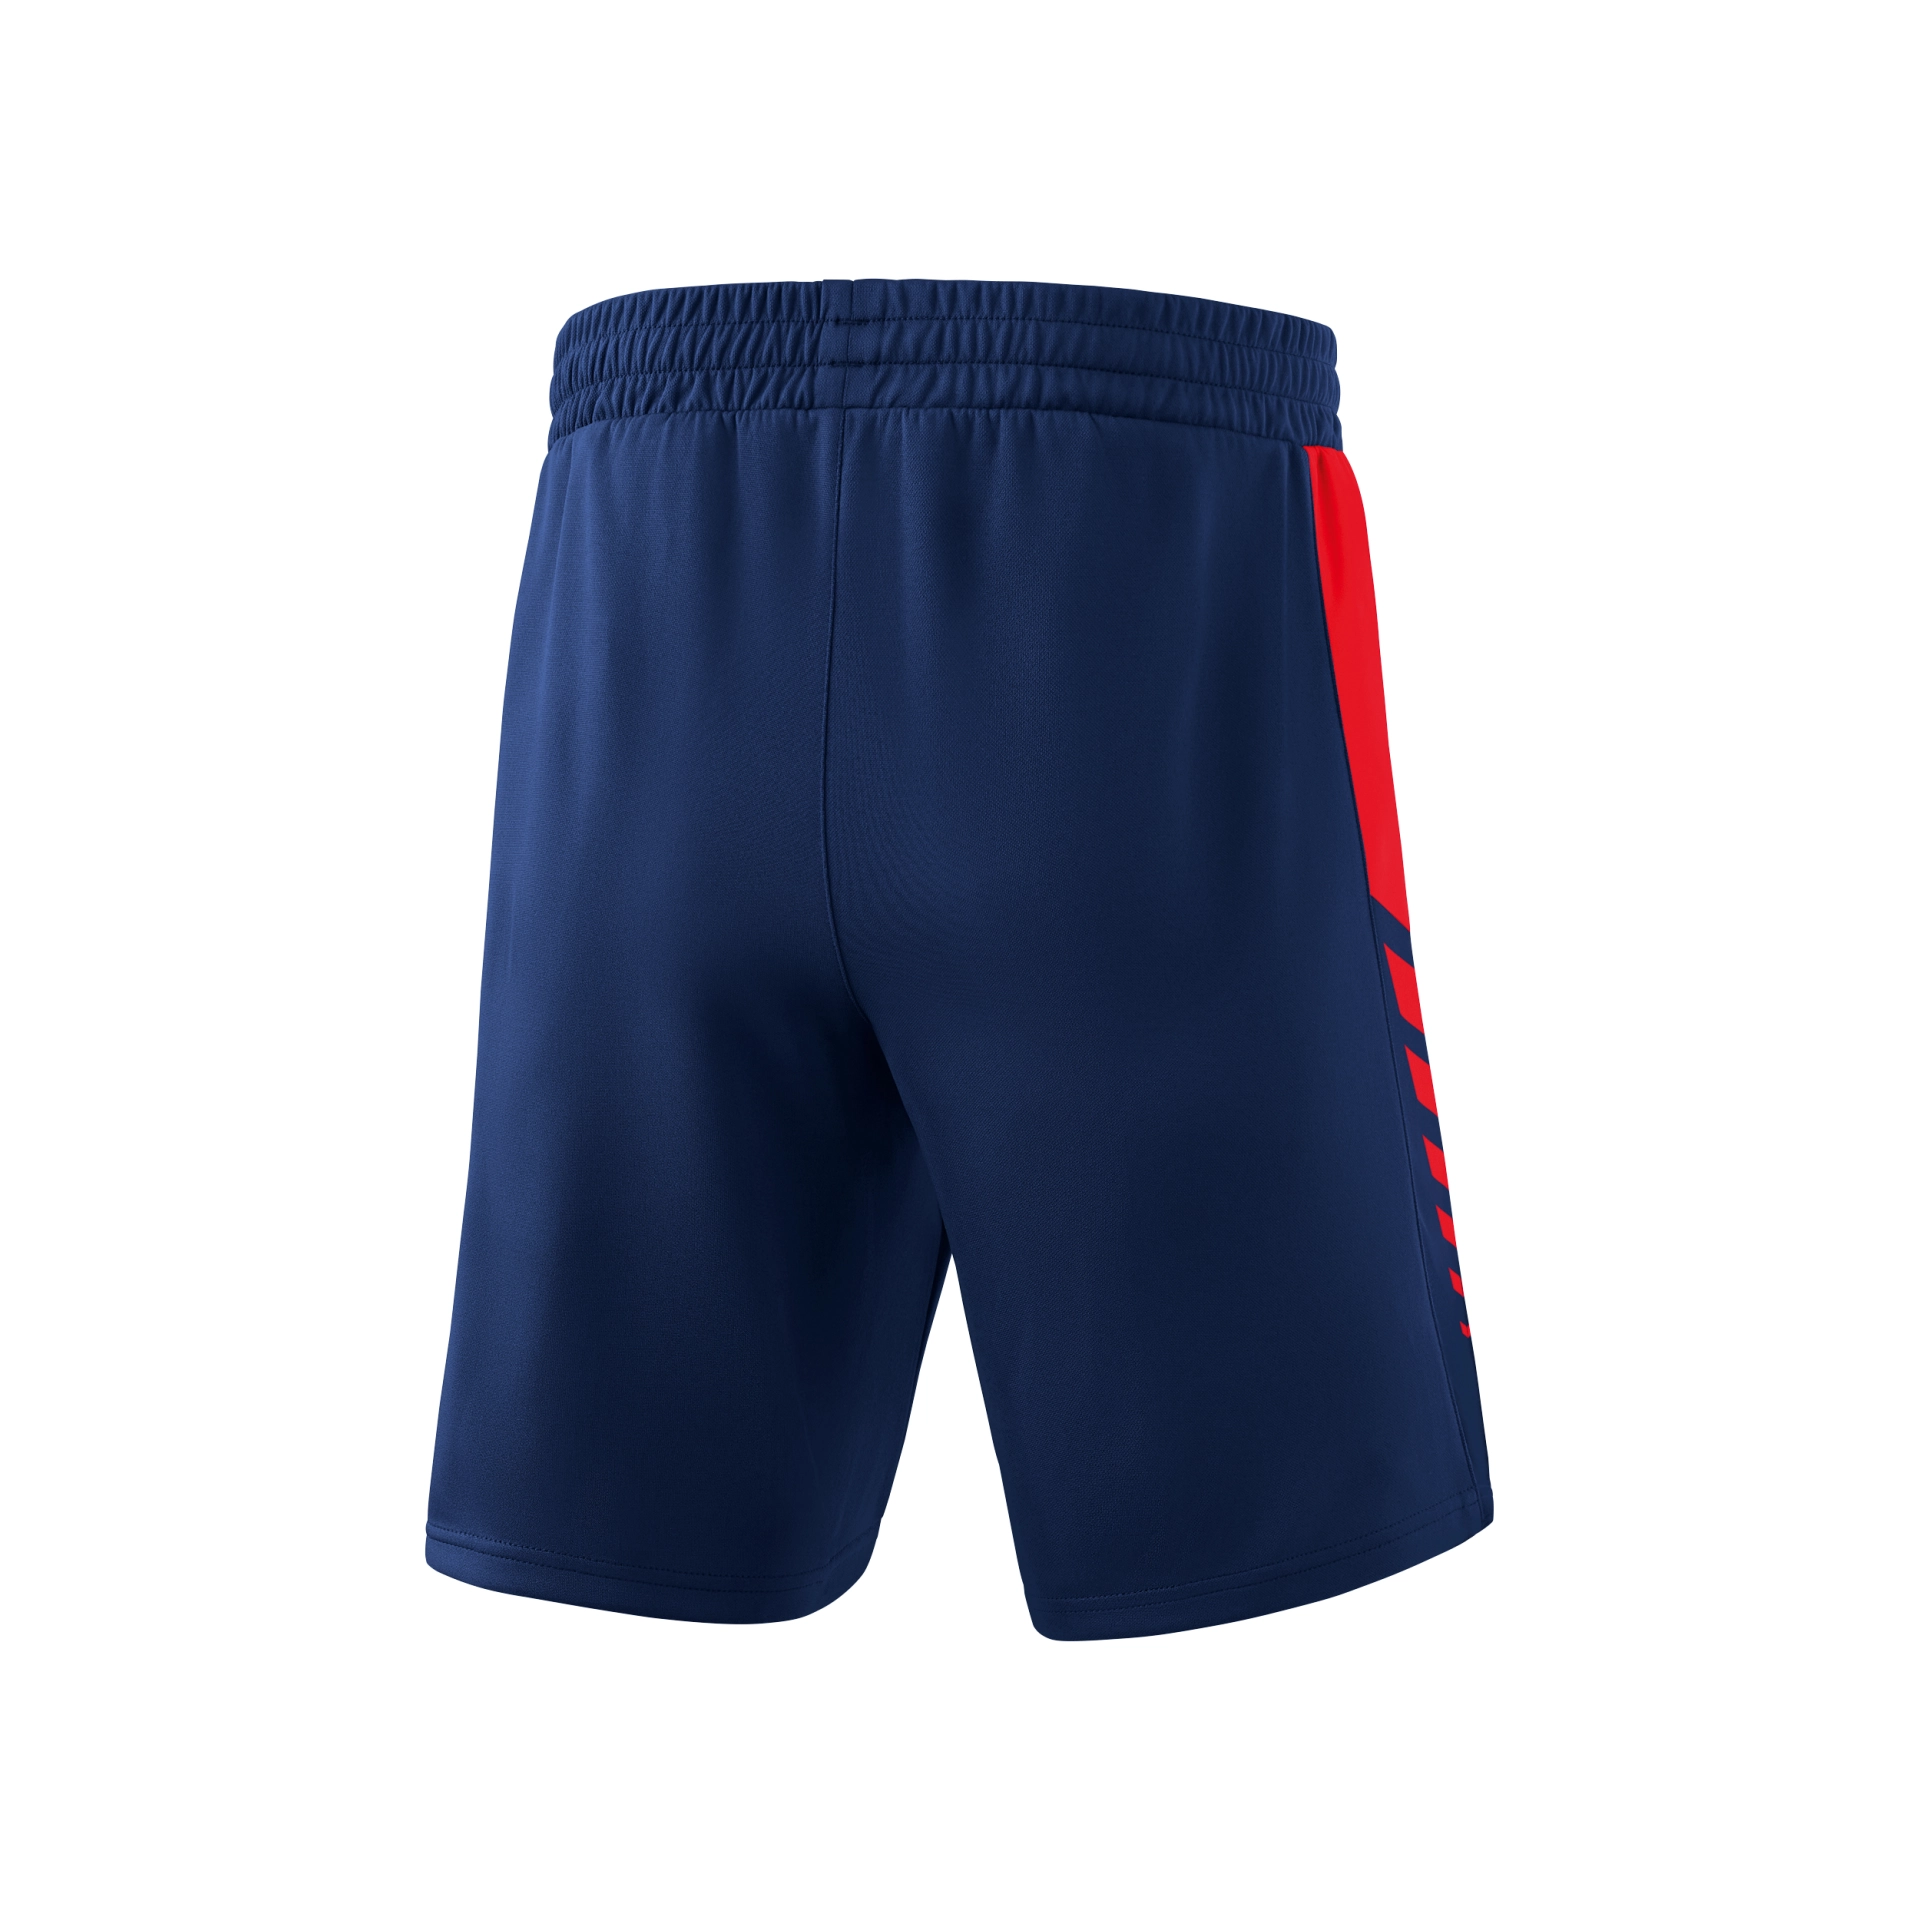 ERIMA Six_Wings_Worker_Shorts 1152214 541250 new navy/red